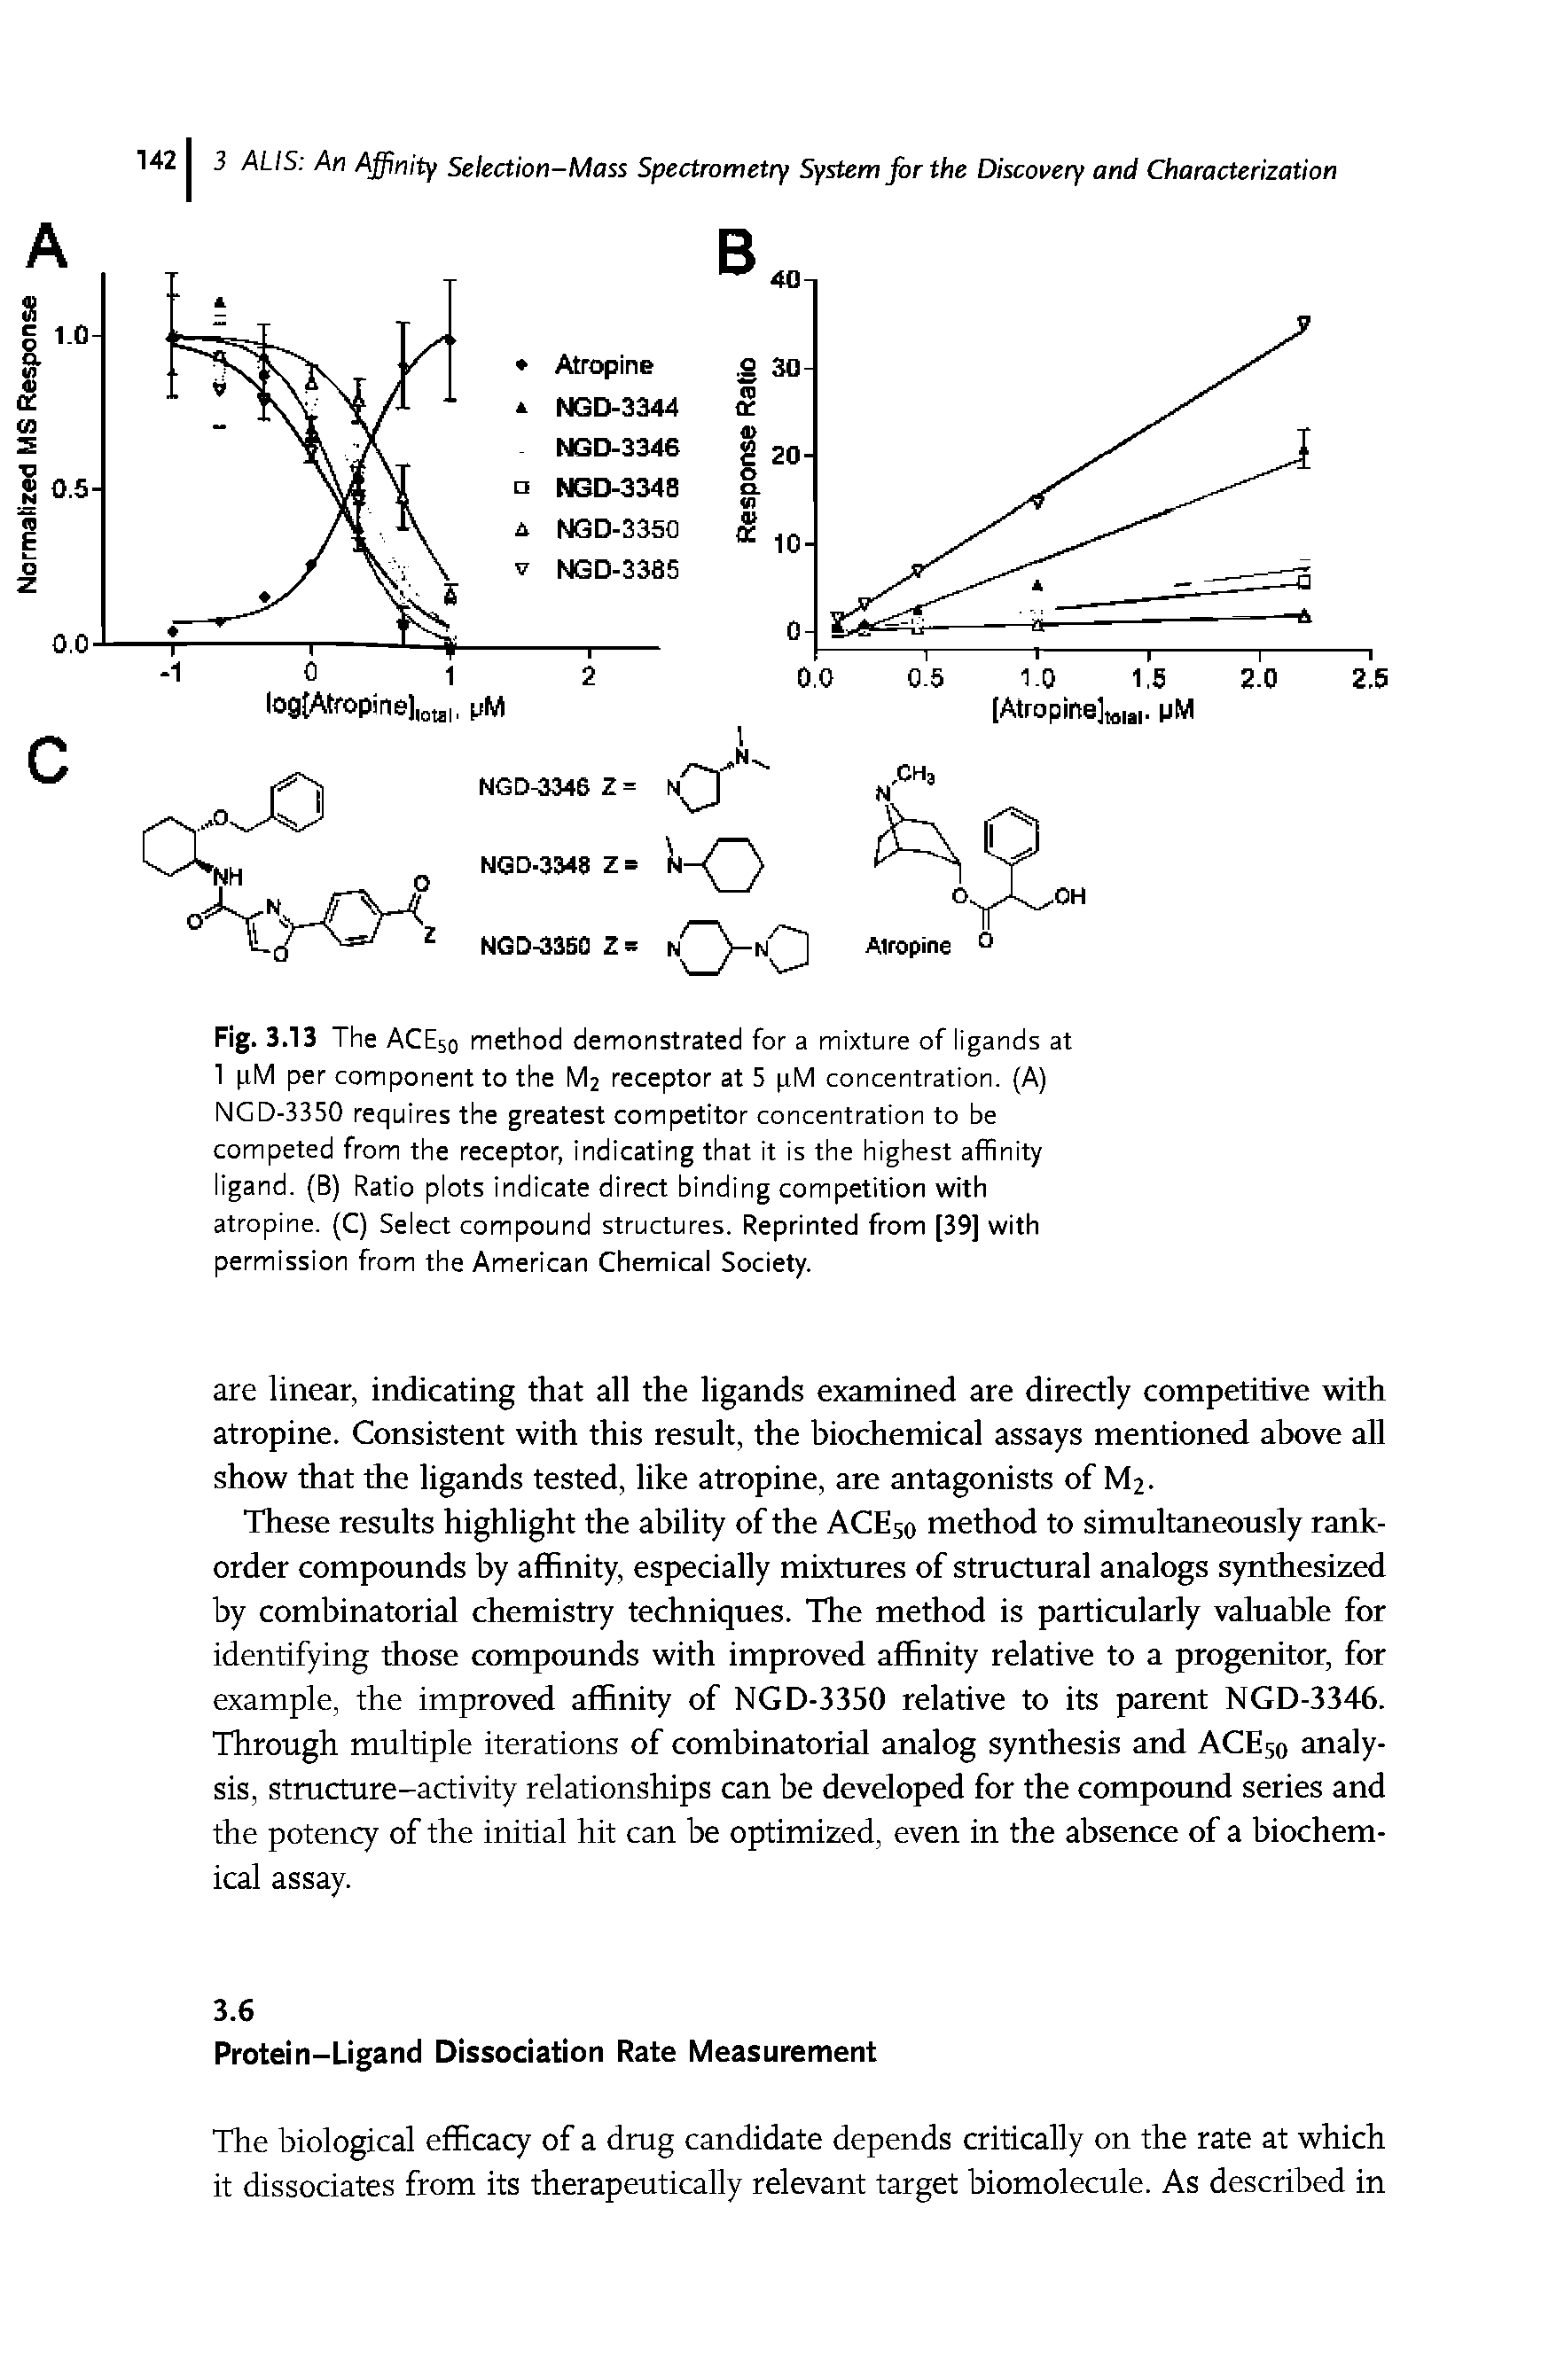 Fig. 3.13 The ACE50 method demonstrated for a mixture of ligands at 1 tM per component to the M2 receptor at 5 pM concentration. (A) NGD-3350 requires the greatest competitor concentration to be competed from the receptor, indicating that it is the highest affinity ligand. (B) Ratio plots indicate direct binding competition with atropine. (C) Select compound structures. Reprinted from [39] with permission from the American Chemical Society.